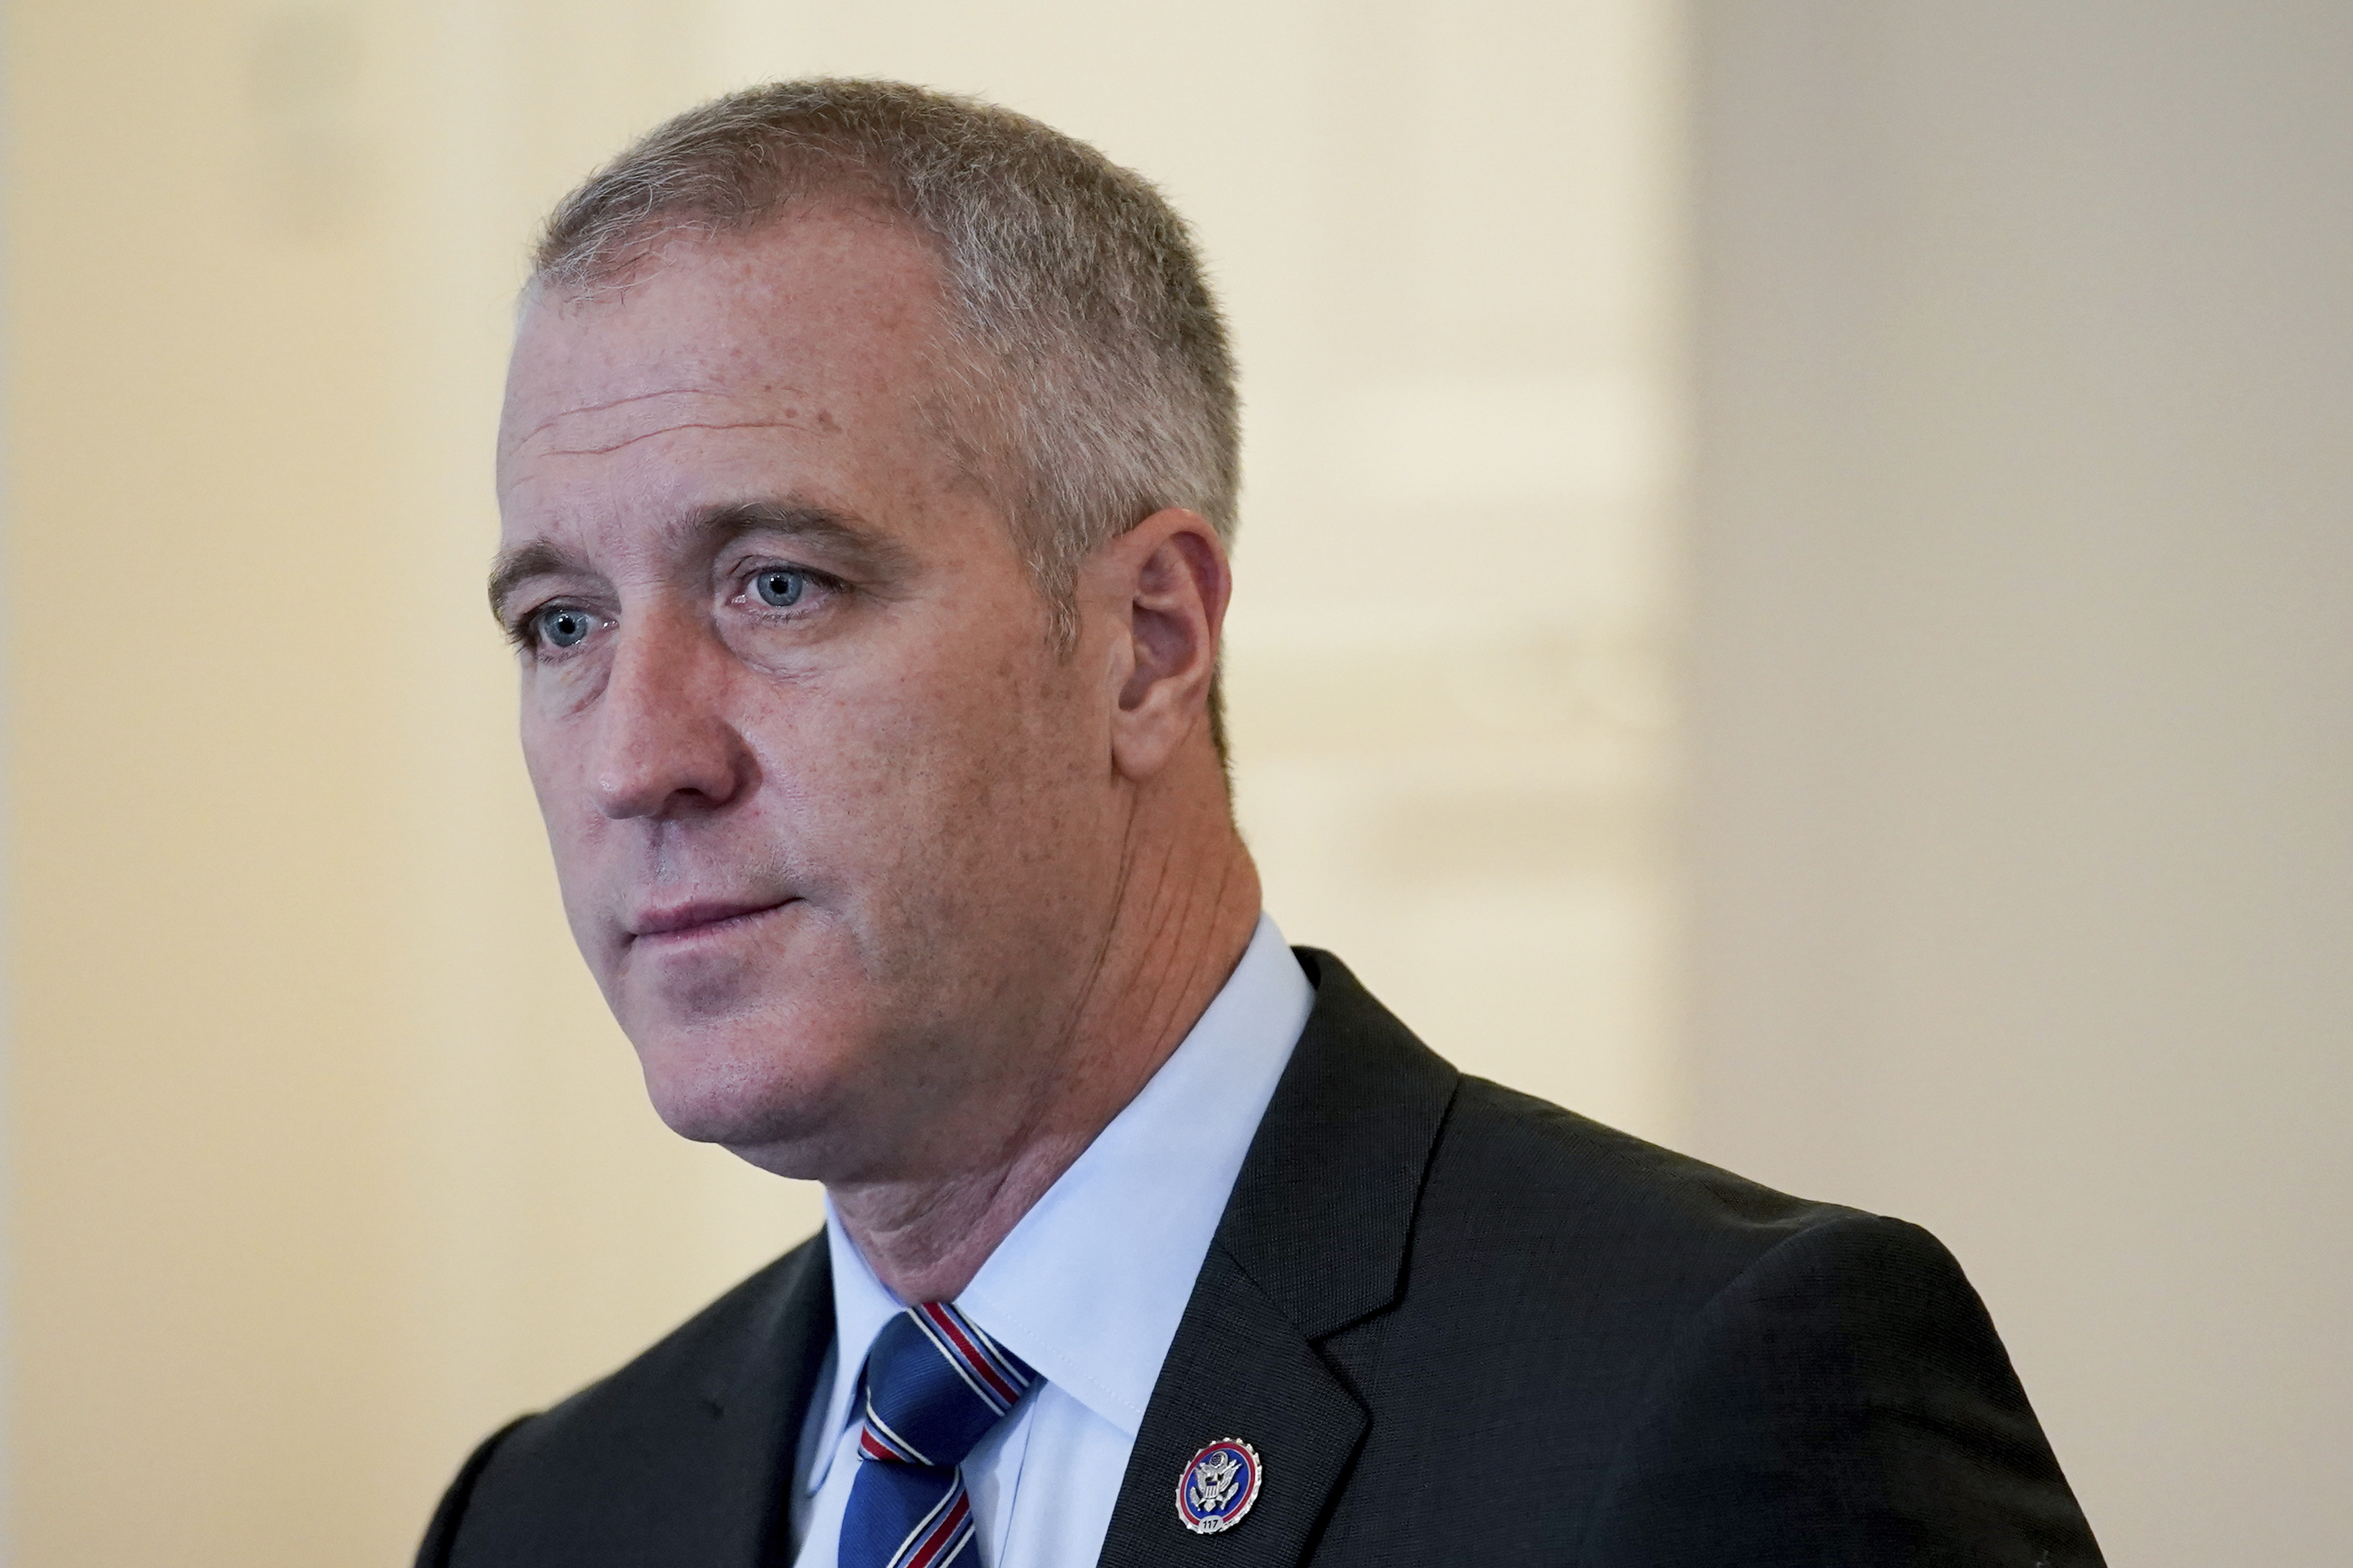 New York Rep. Sean Patrick Maloney has conceded his race to Republican Mike Lawler.